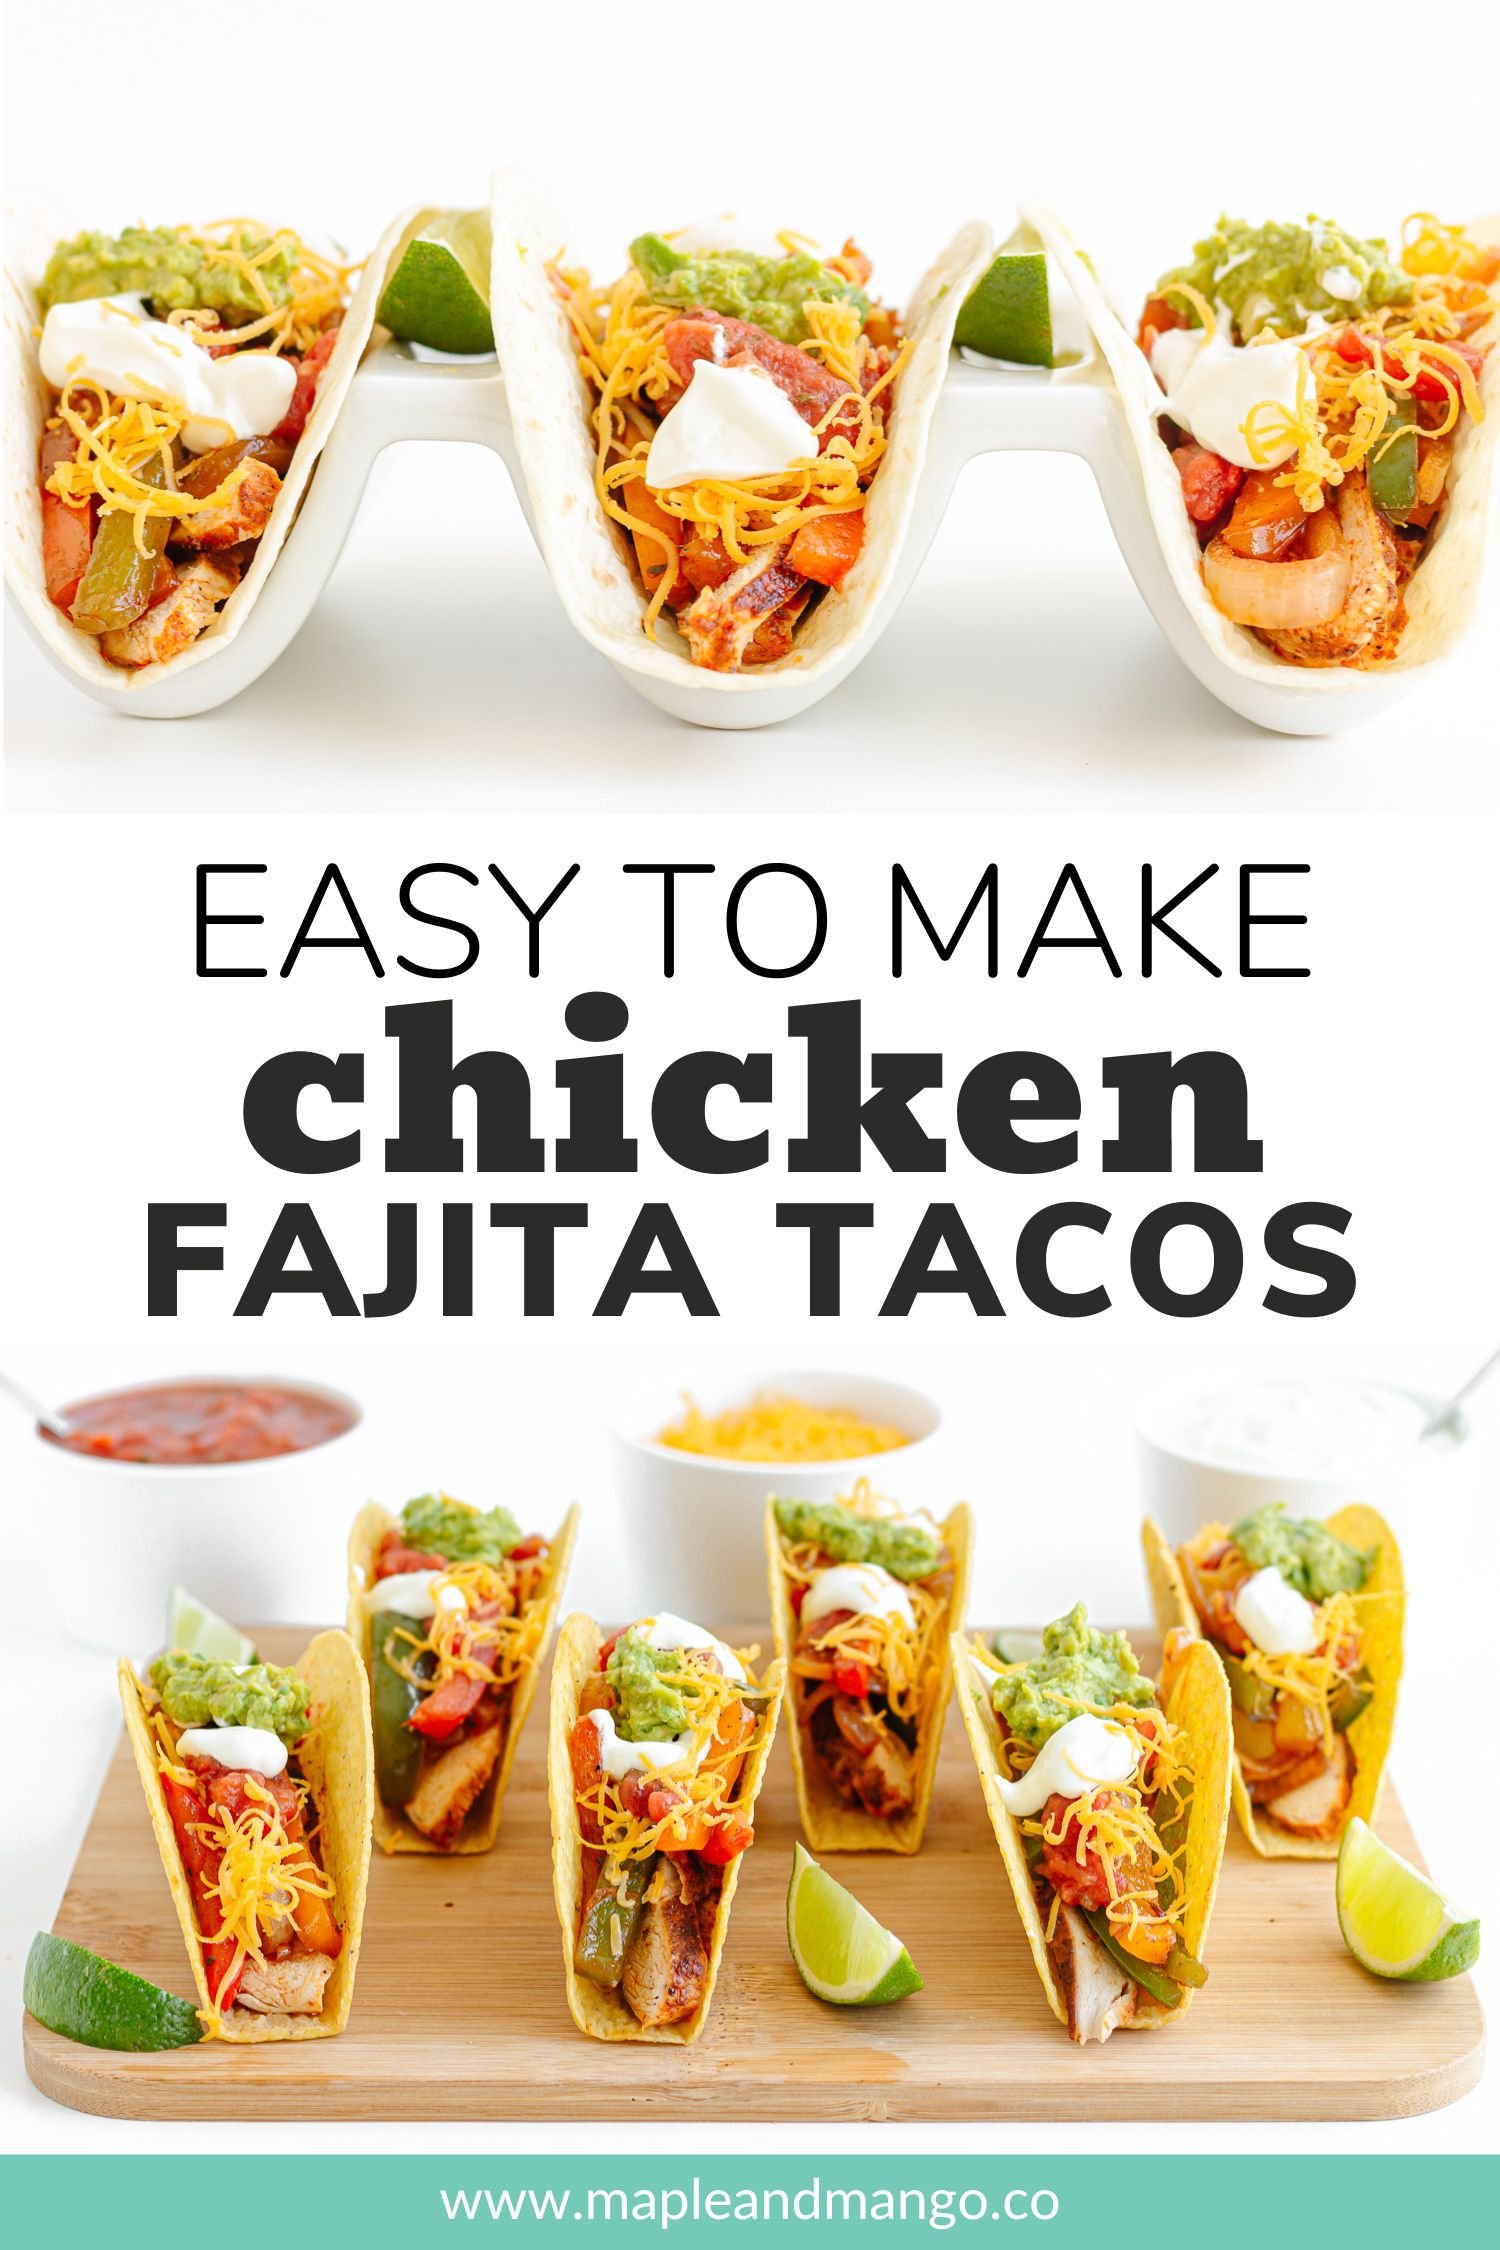 Pinterest graphic with two photos of tacos and text overlay "Easy To Make Chicken Fajita Tacos".